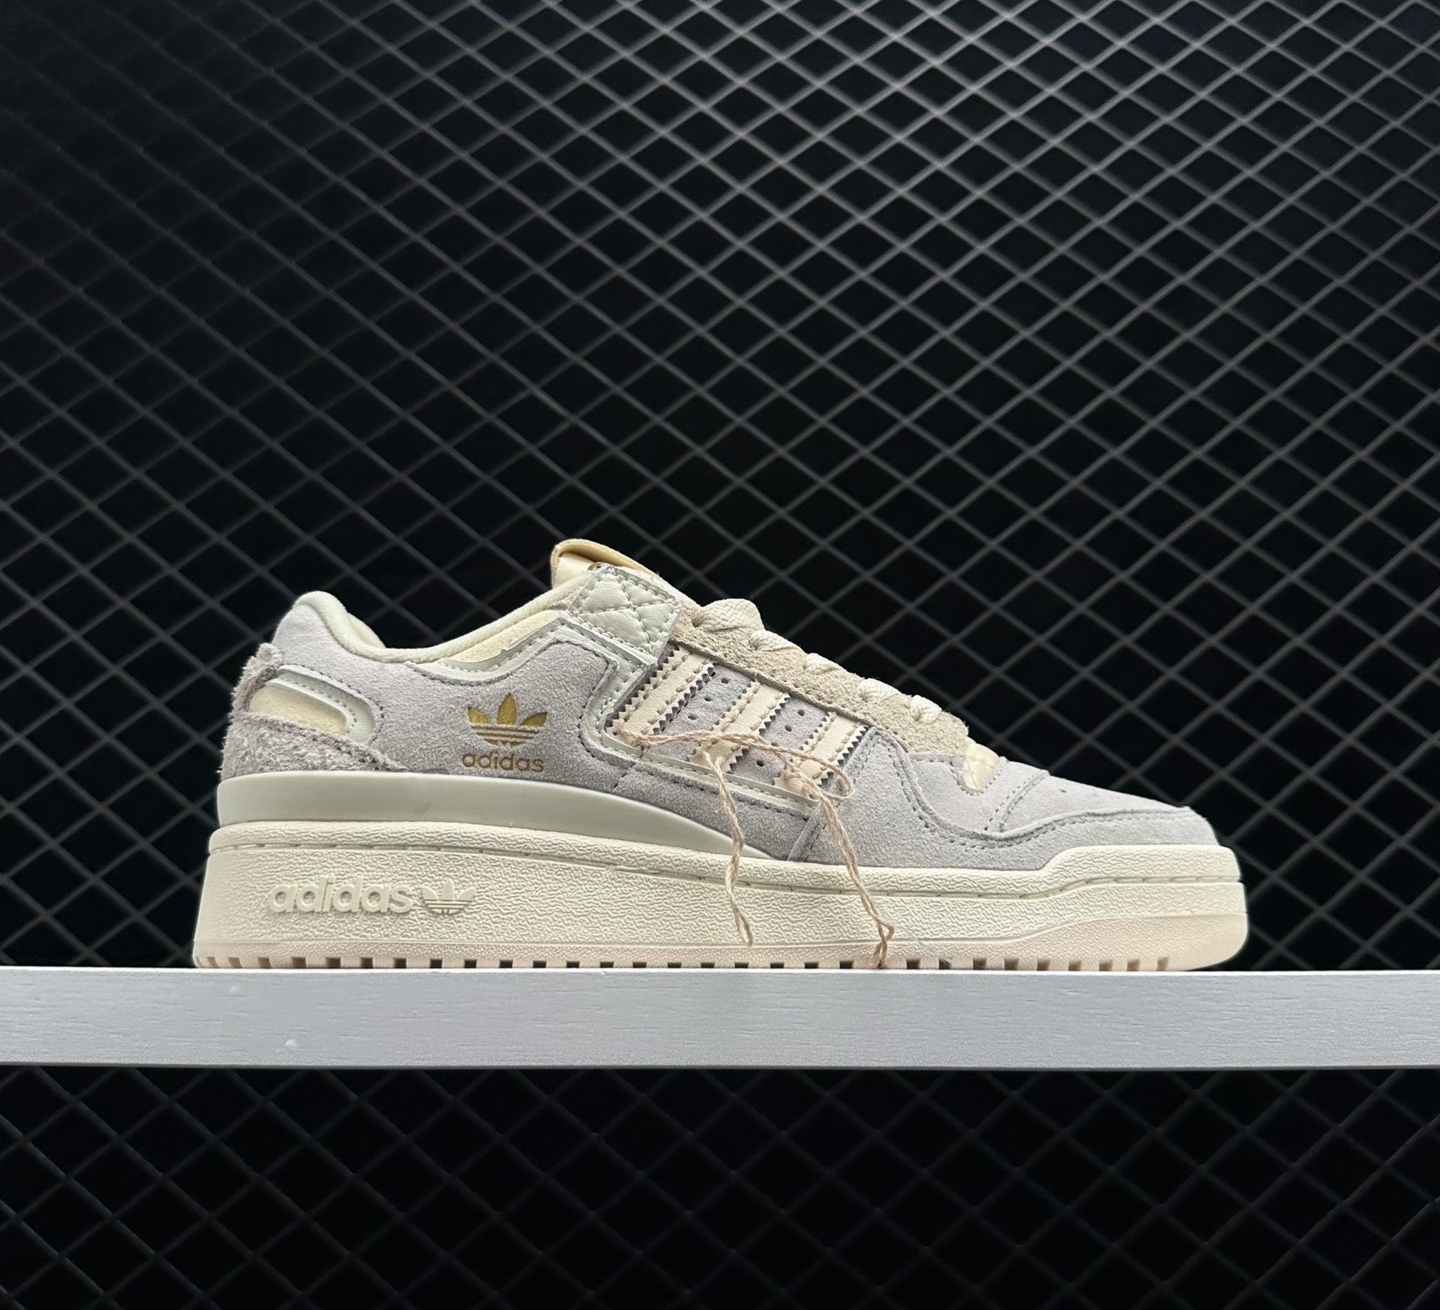 Adidas Forum 84 Low 'Off White' GW0299: Modern Iconic Sneakers